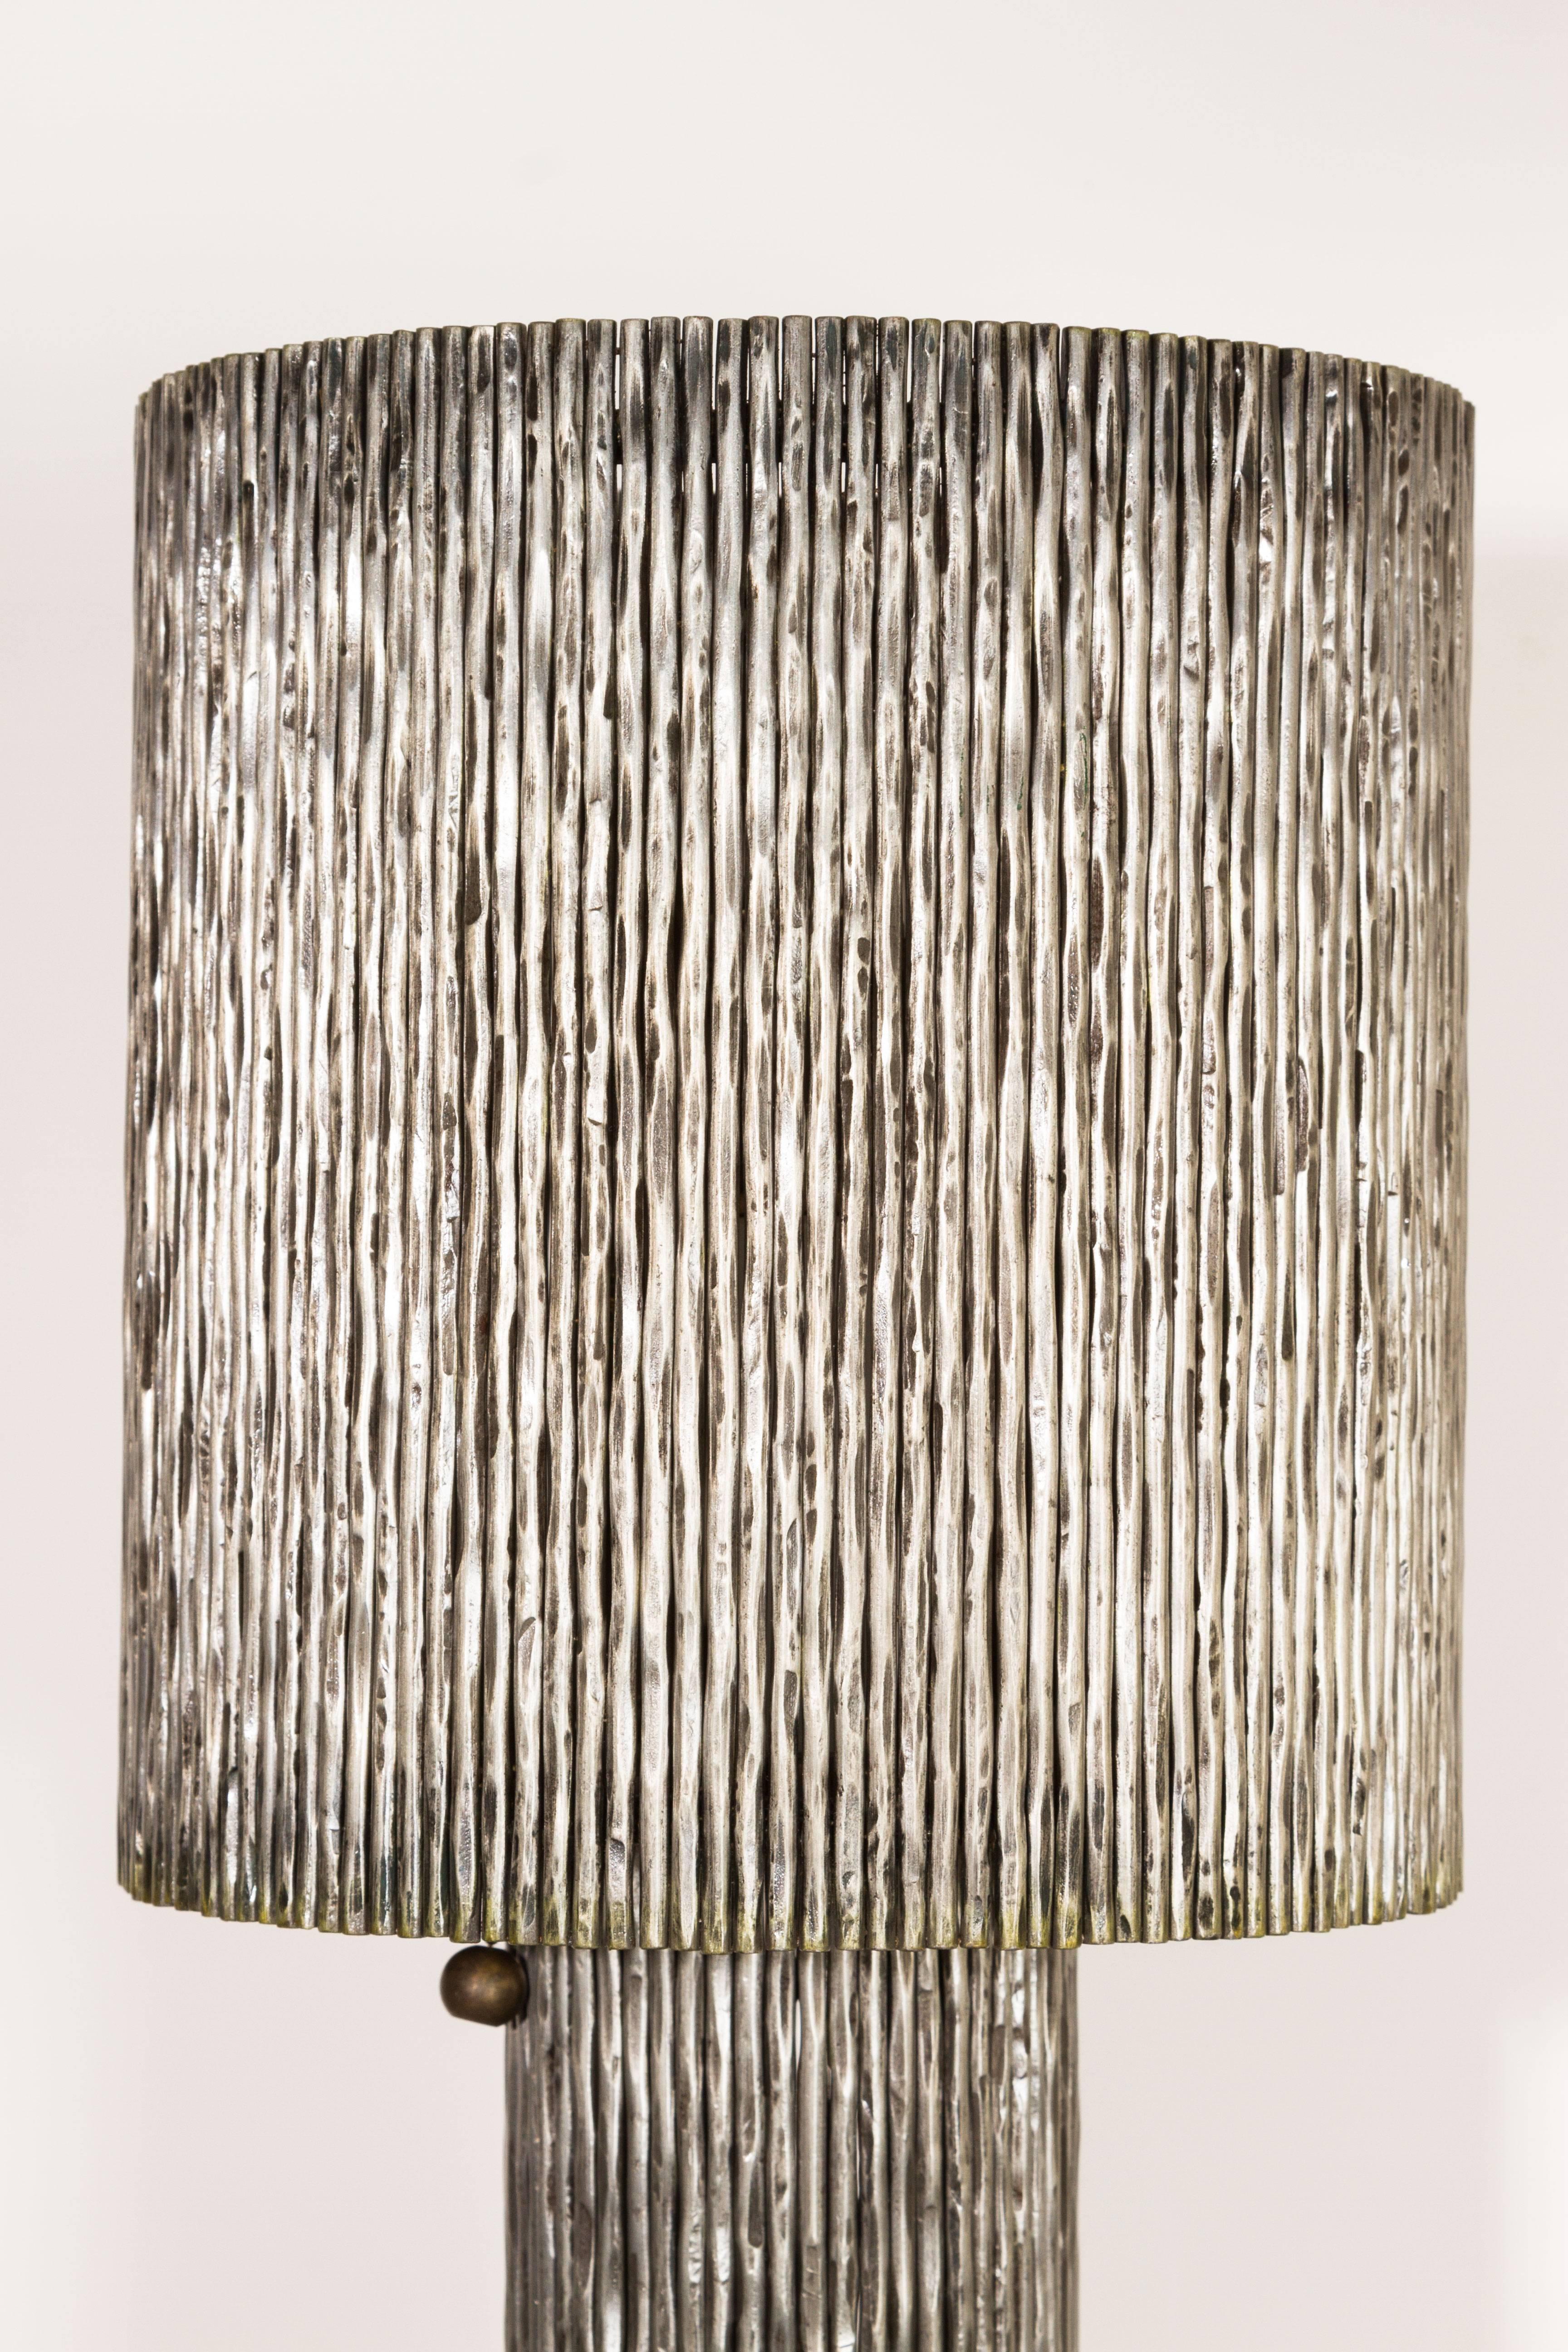 Lacquered American Brutalist Table Lamp